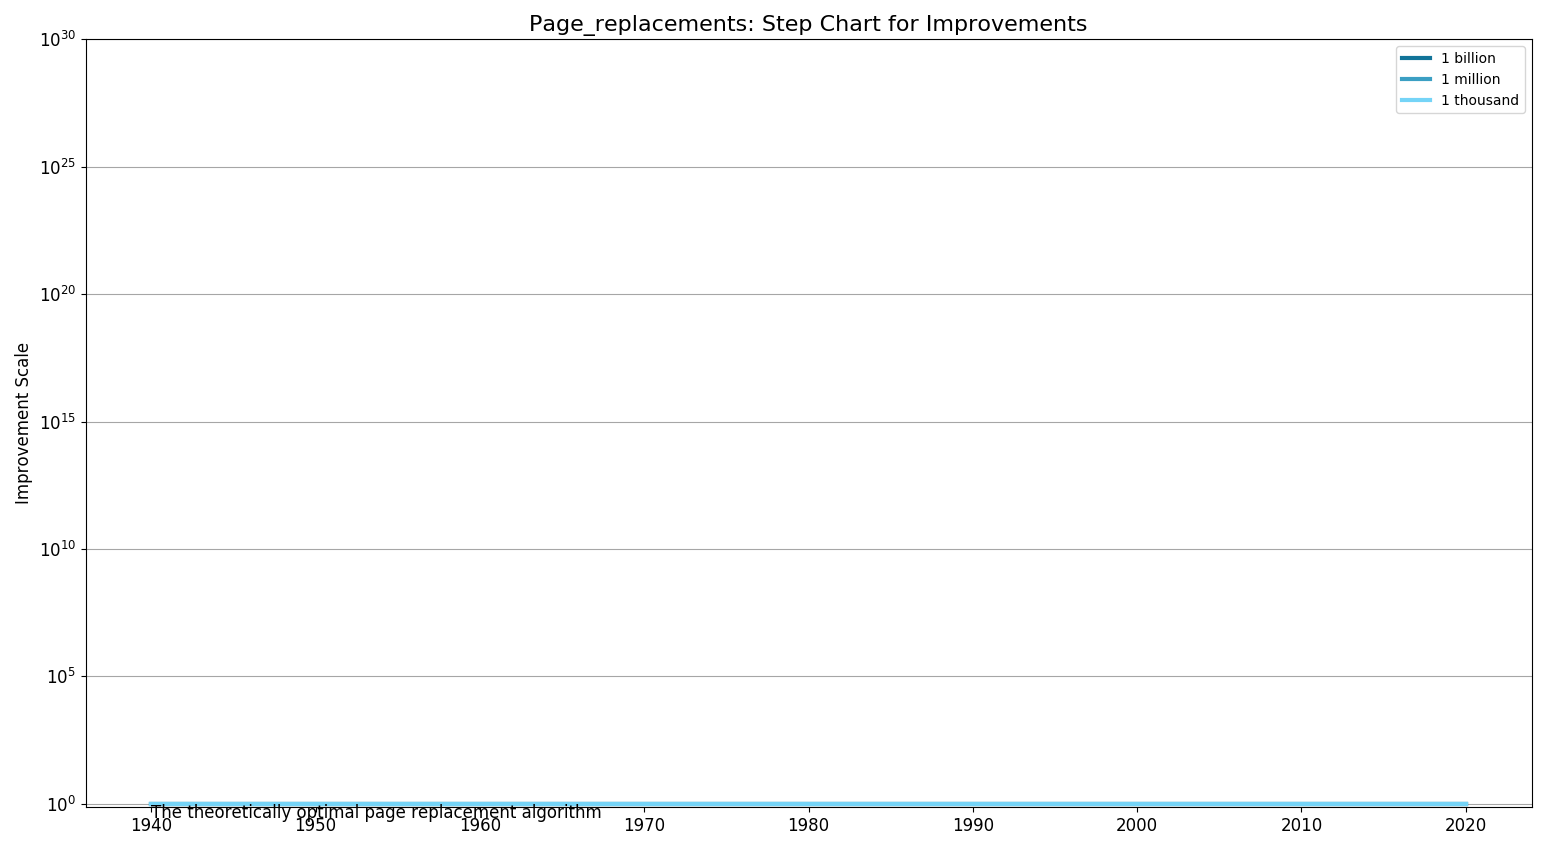 File:Page replacementsStepChart.png